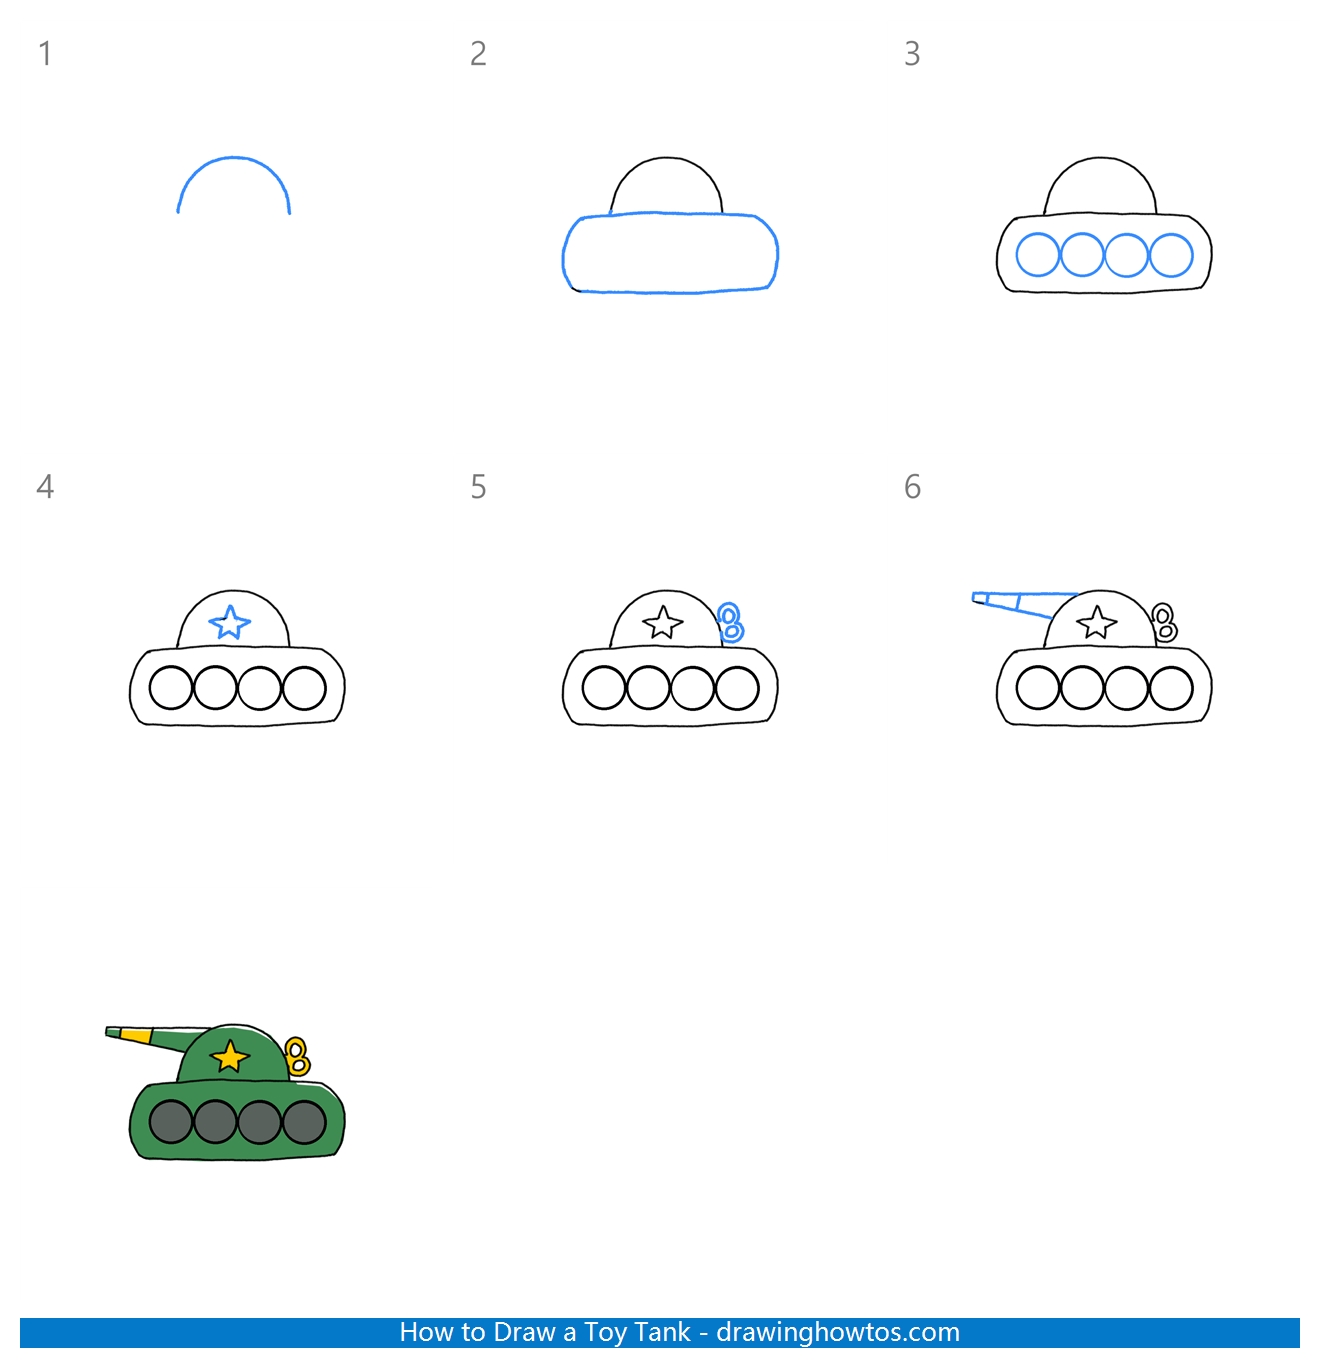 How to Draw a Toy Tank Step by Step